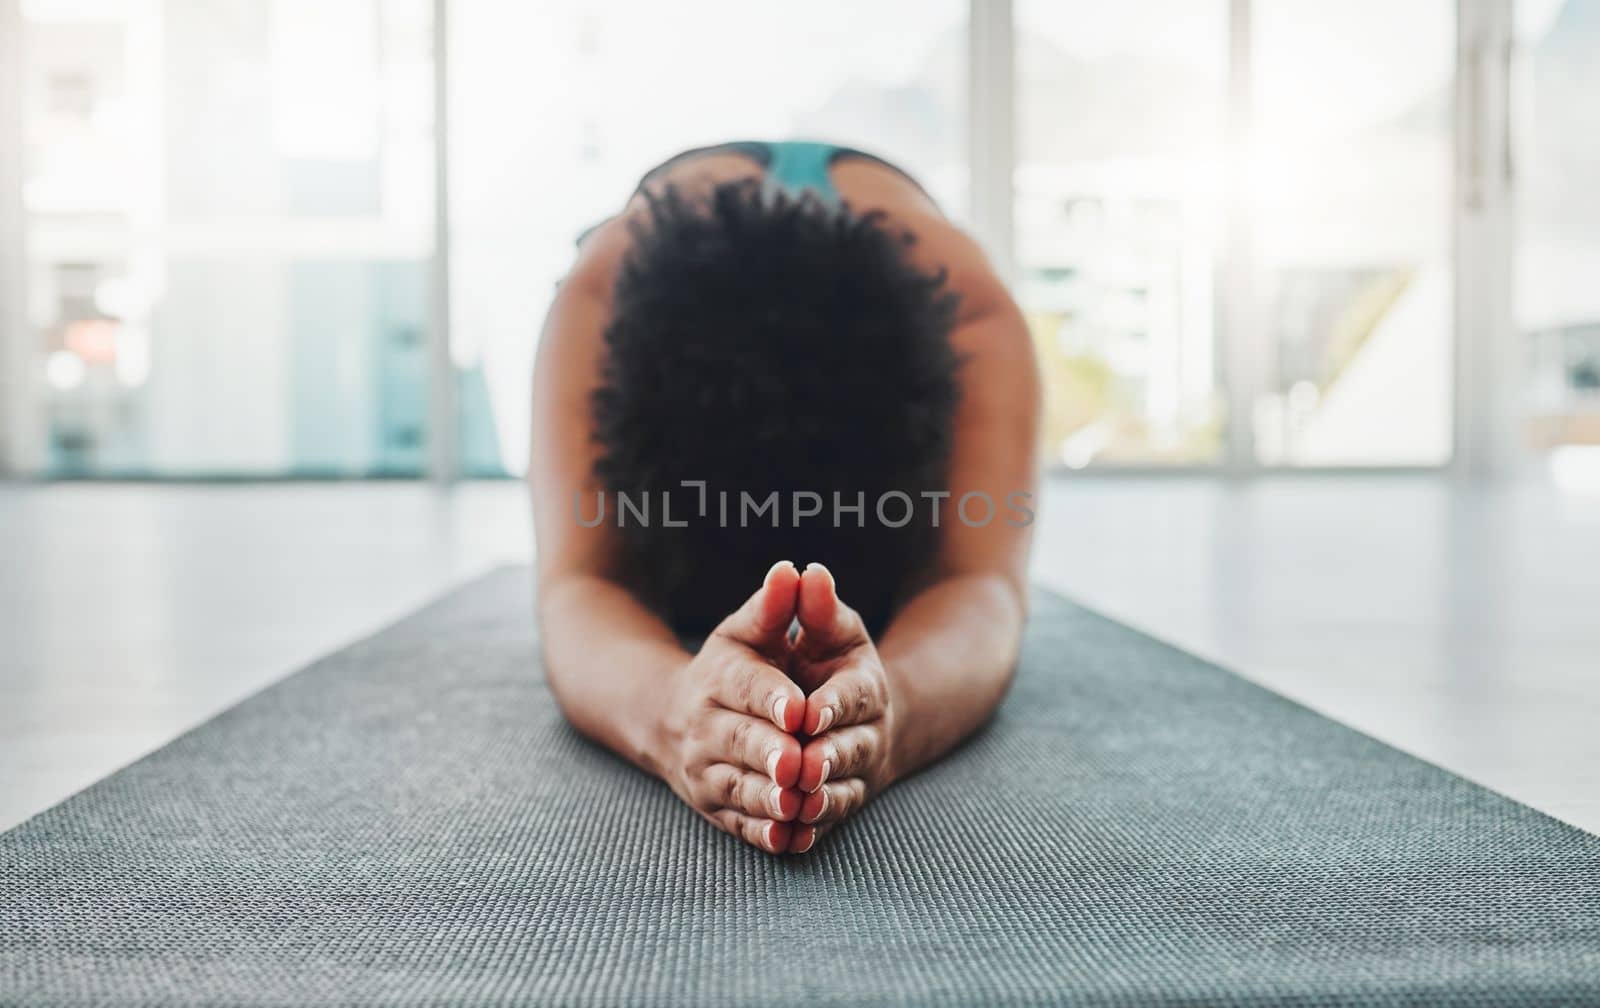 Yoga, arm stretching and prayer hands of a black woman in a gym for zen, relax and exercise. Pilates, peace and meditation training of an athlete in prayer pose on the floor feeling calm from stretch.